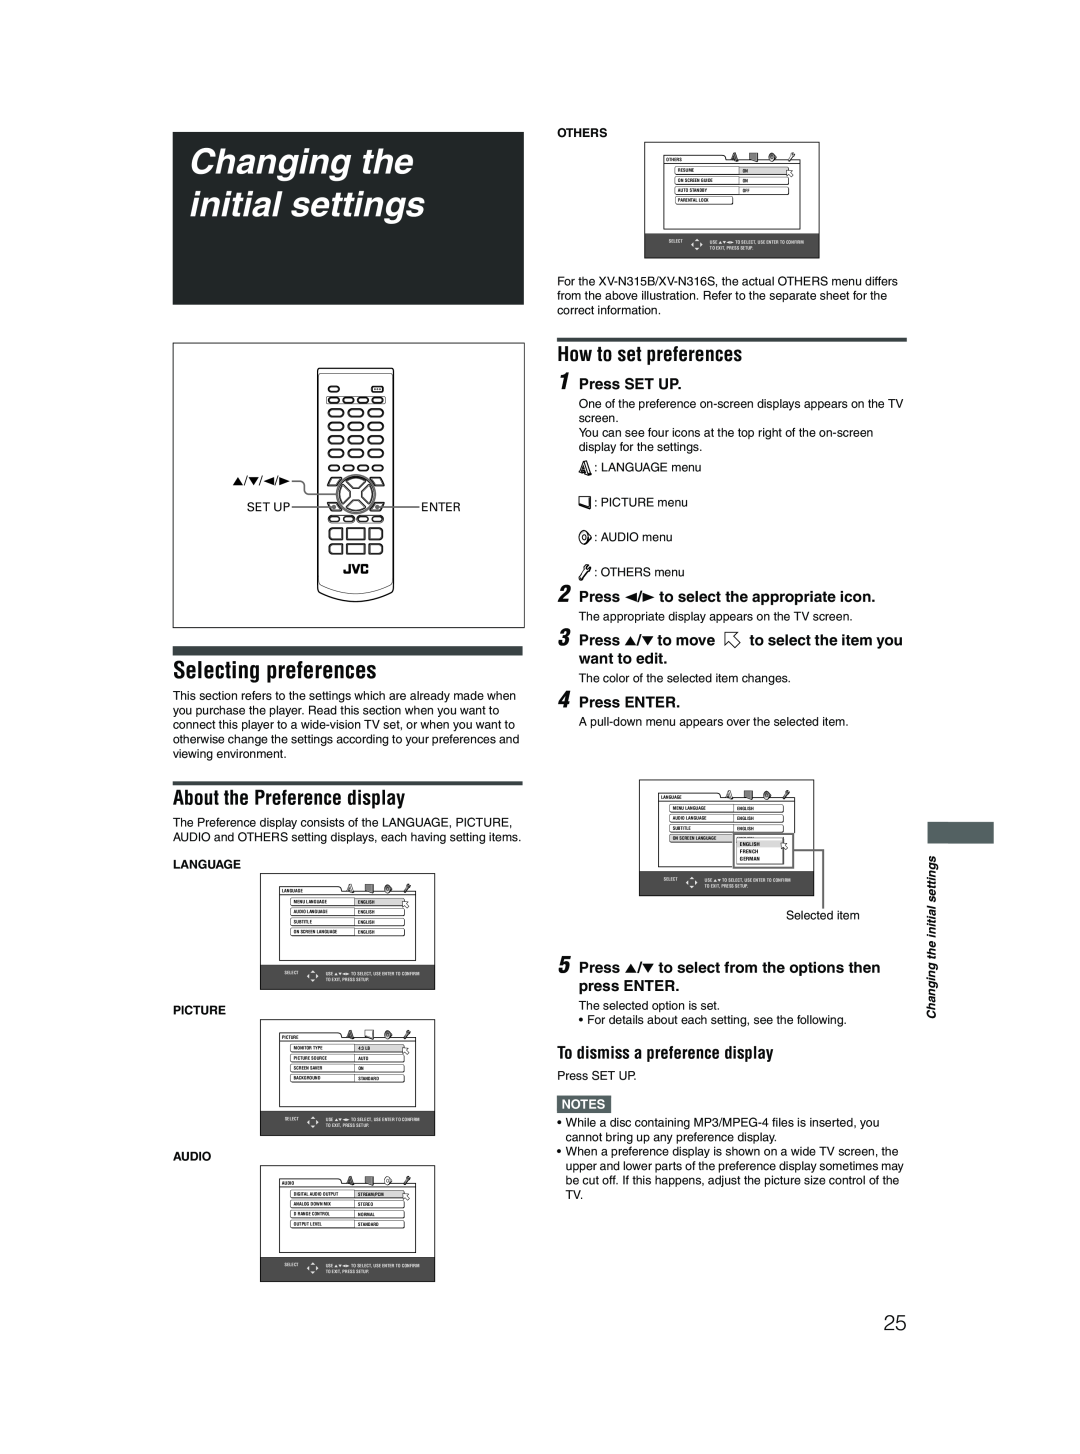 JVC XV-N315B Changing the initial settings, Selecting preferences, About the Preference display, How to set preferences 